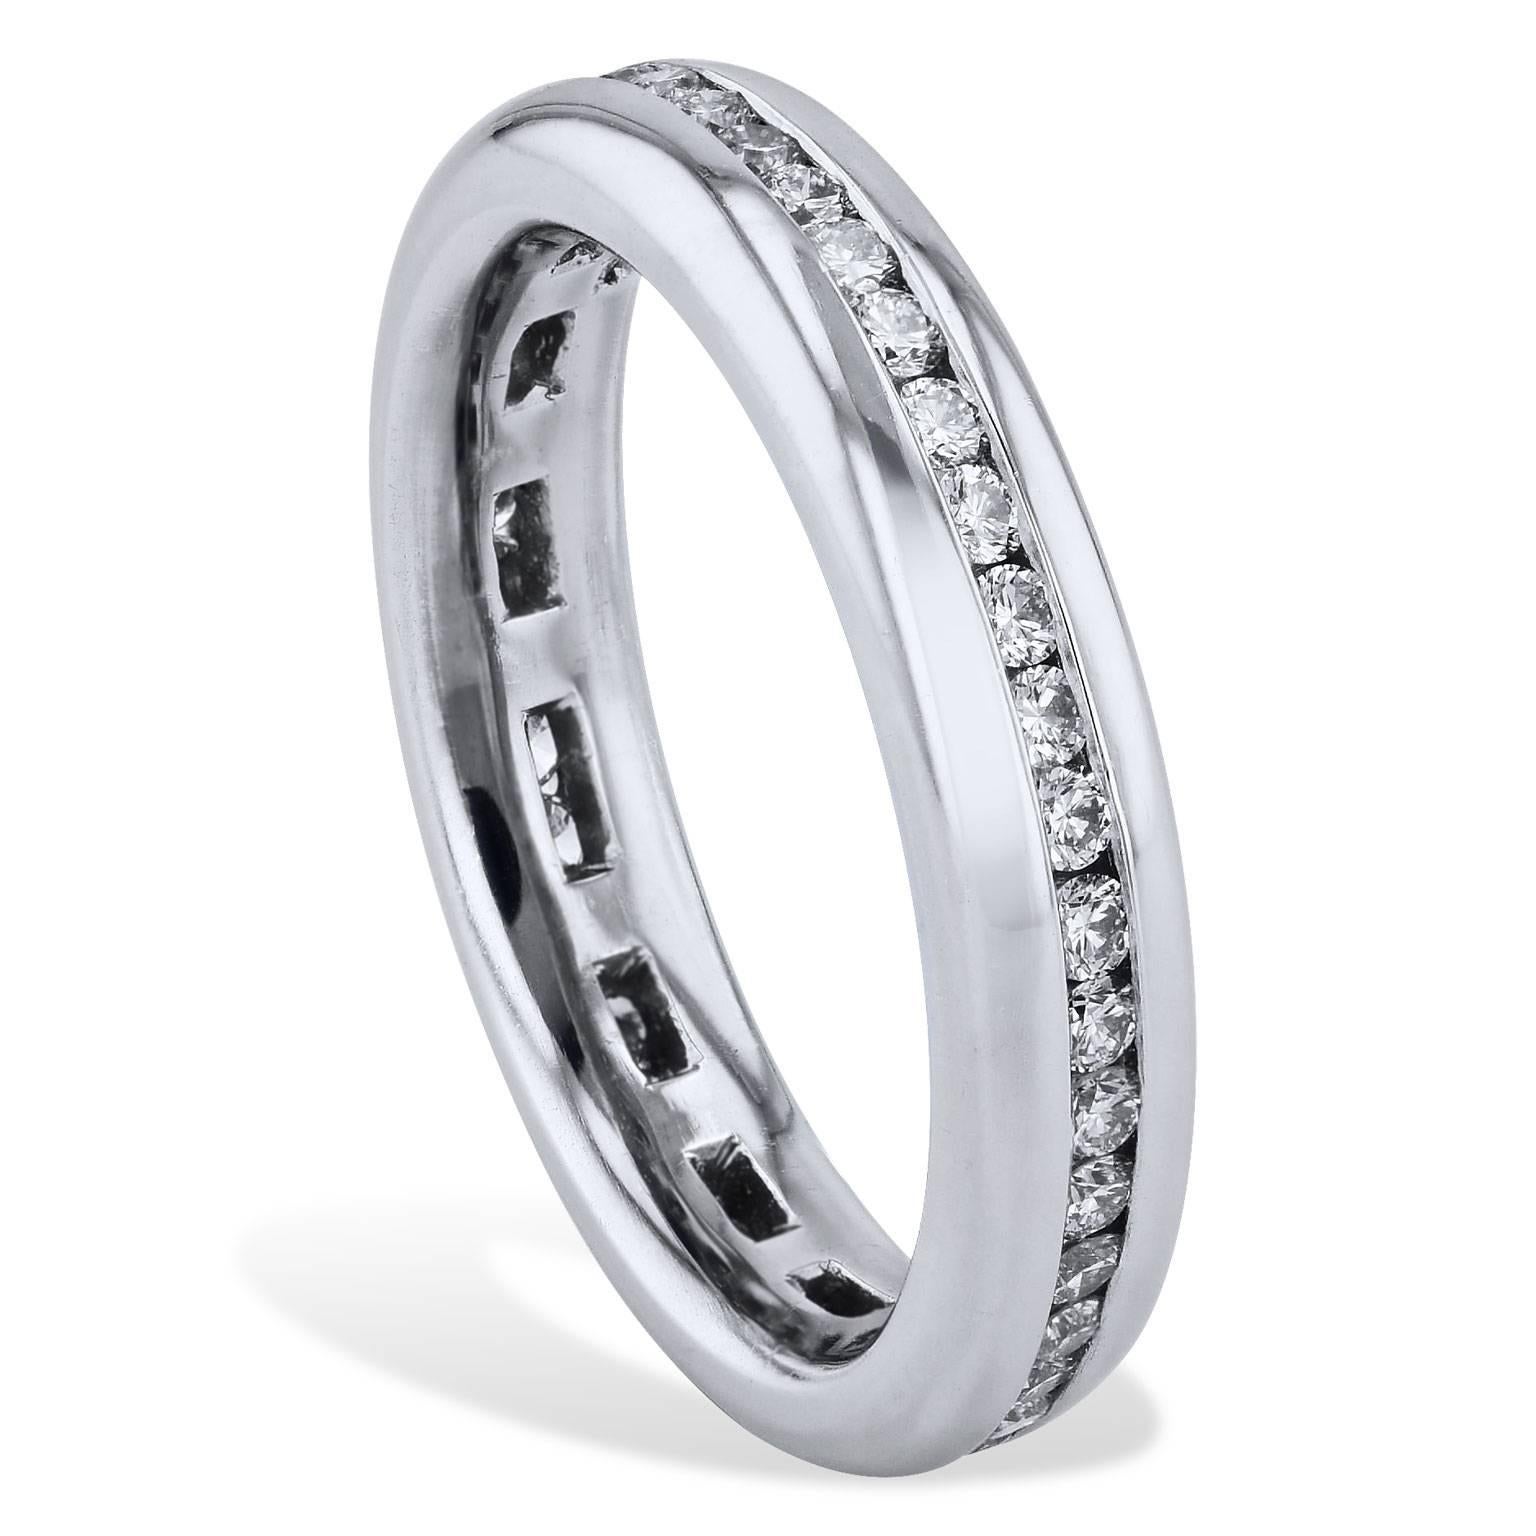 This handmade diamond eternity band ring features 0.64 carat of round brilliant cut channel set diamond. (F/G/VS1). Fashioned in platinum with satin finish, this ring reflects a marvelous display of color and light.